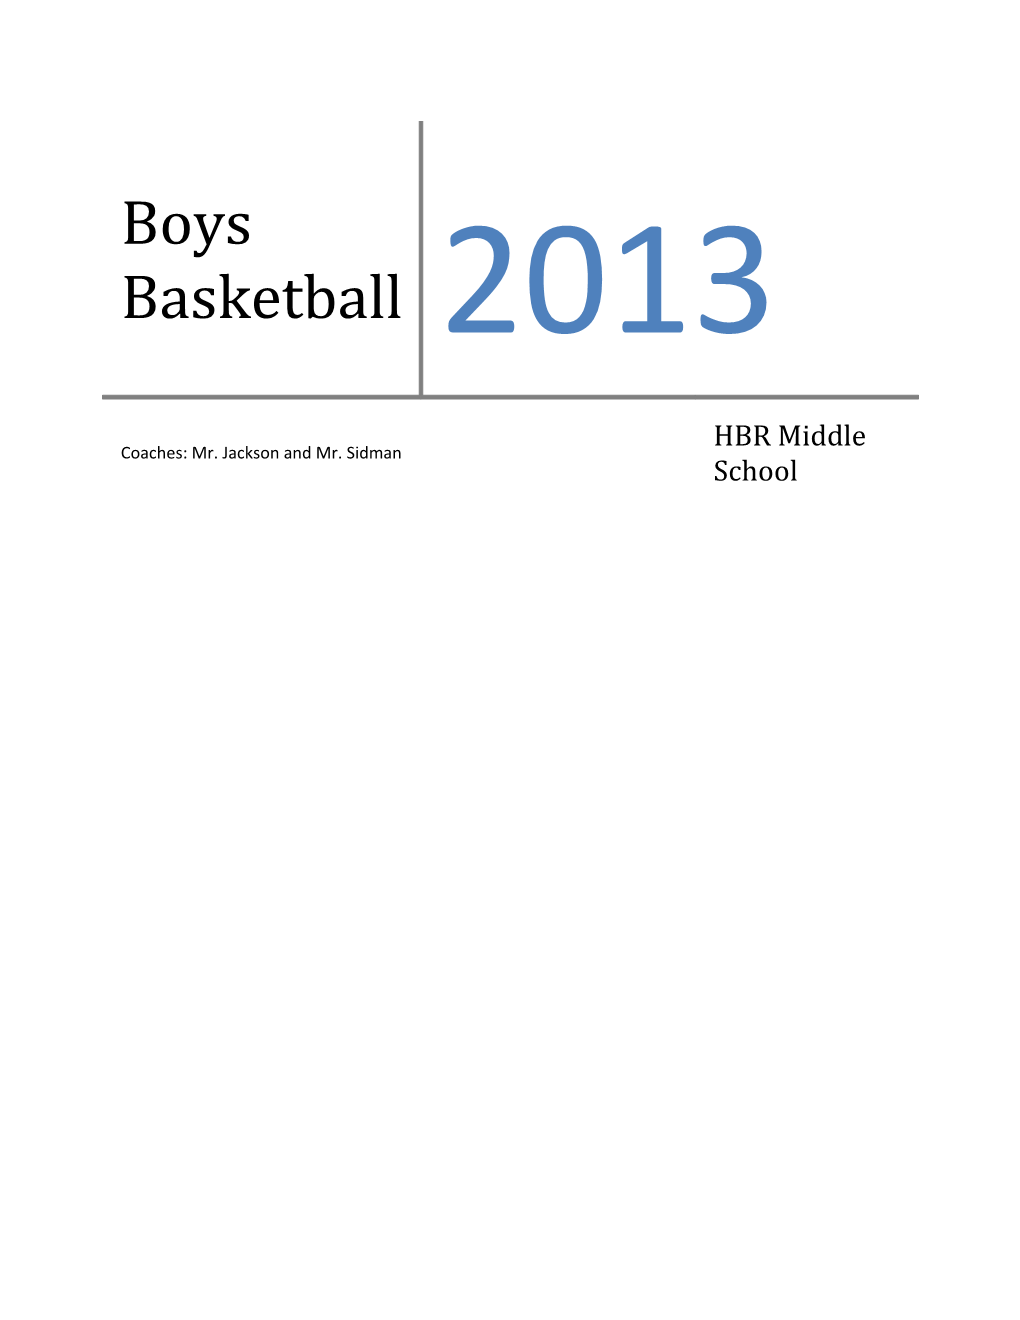 Welcome to Hinckley-Big Rock Middle School Basketball Program. Our Program Consists Of